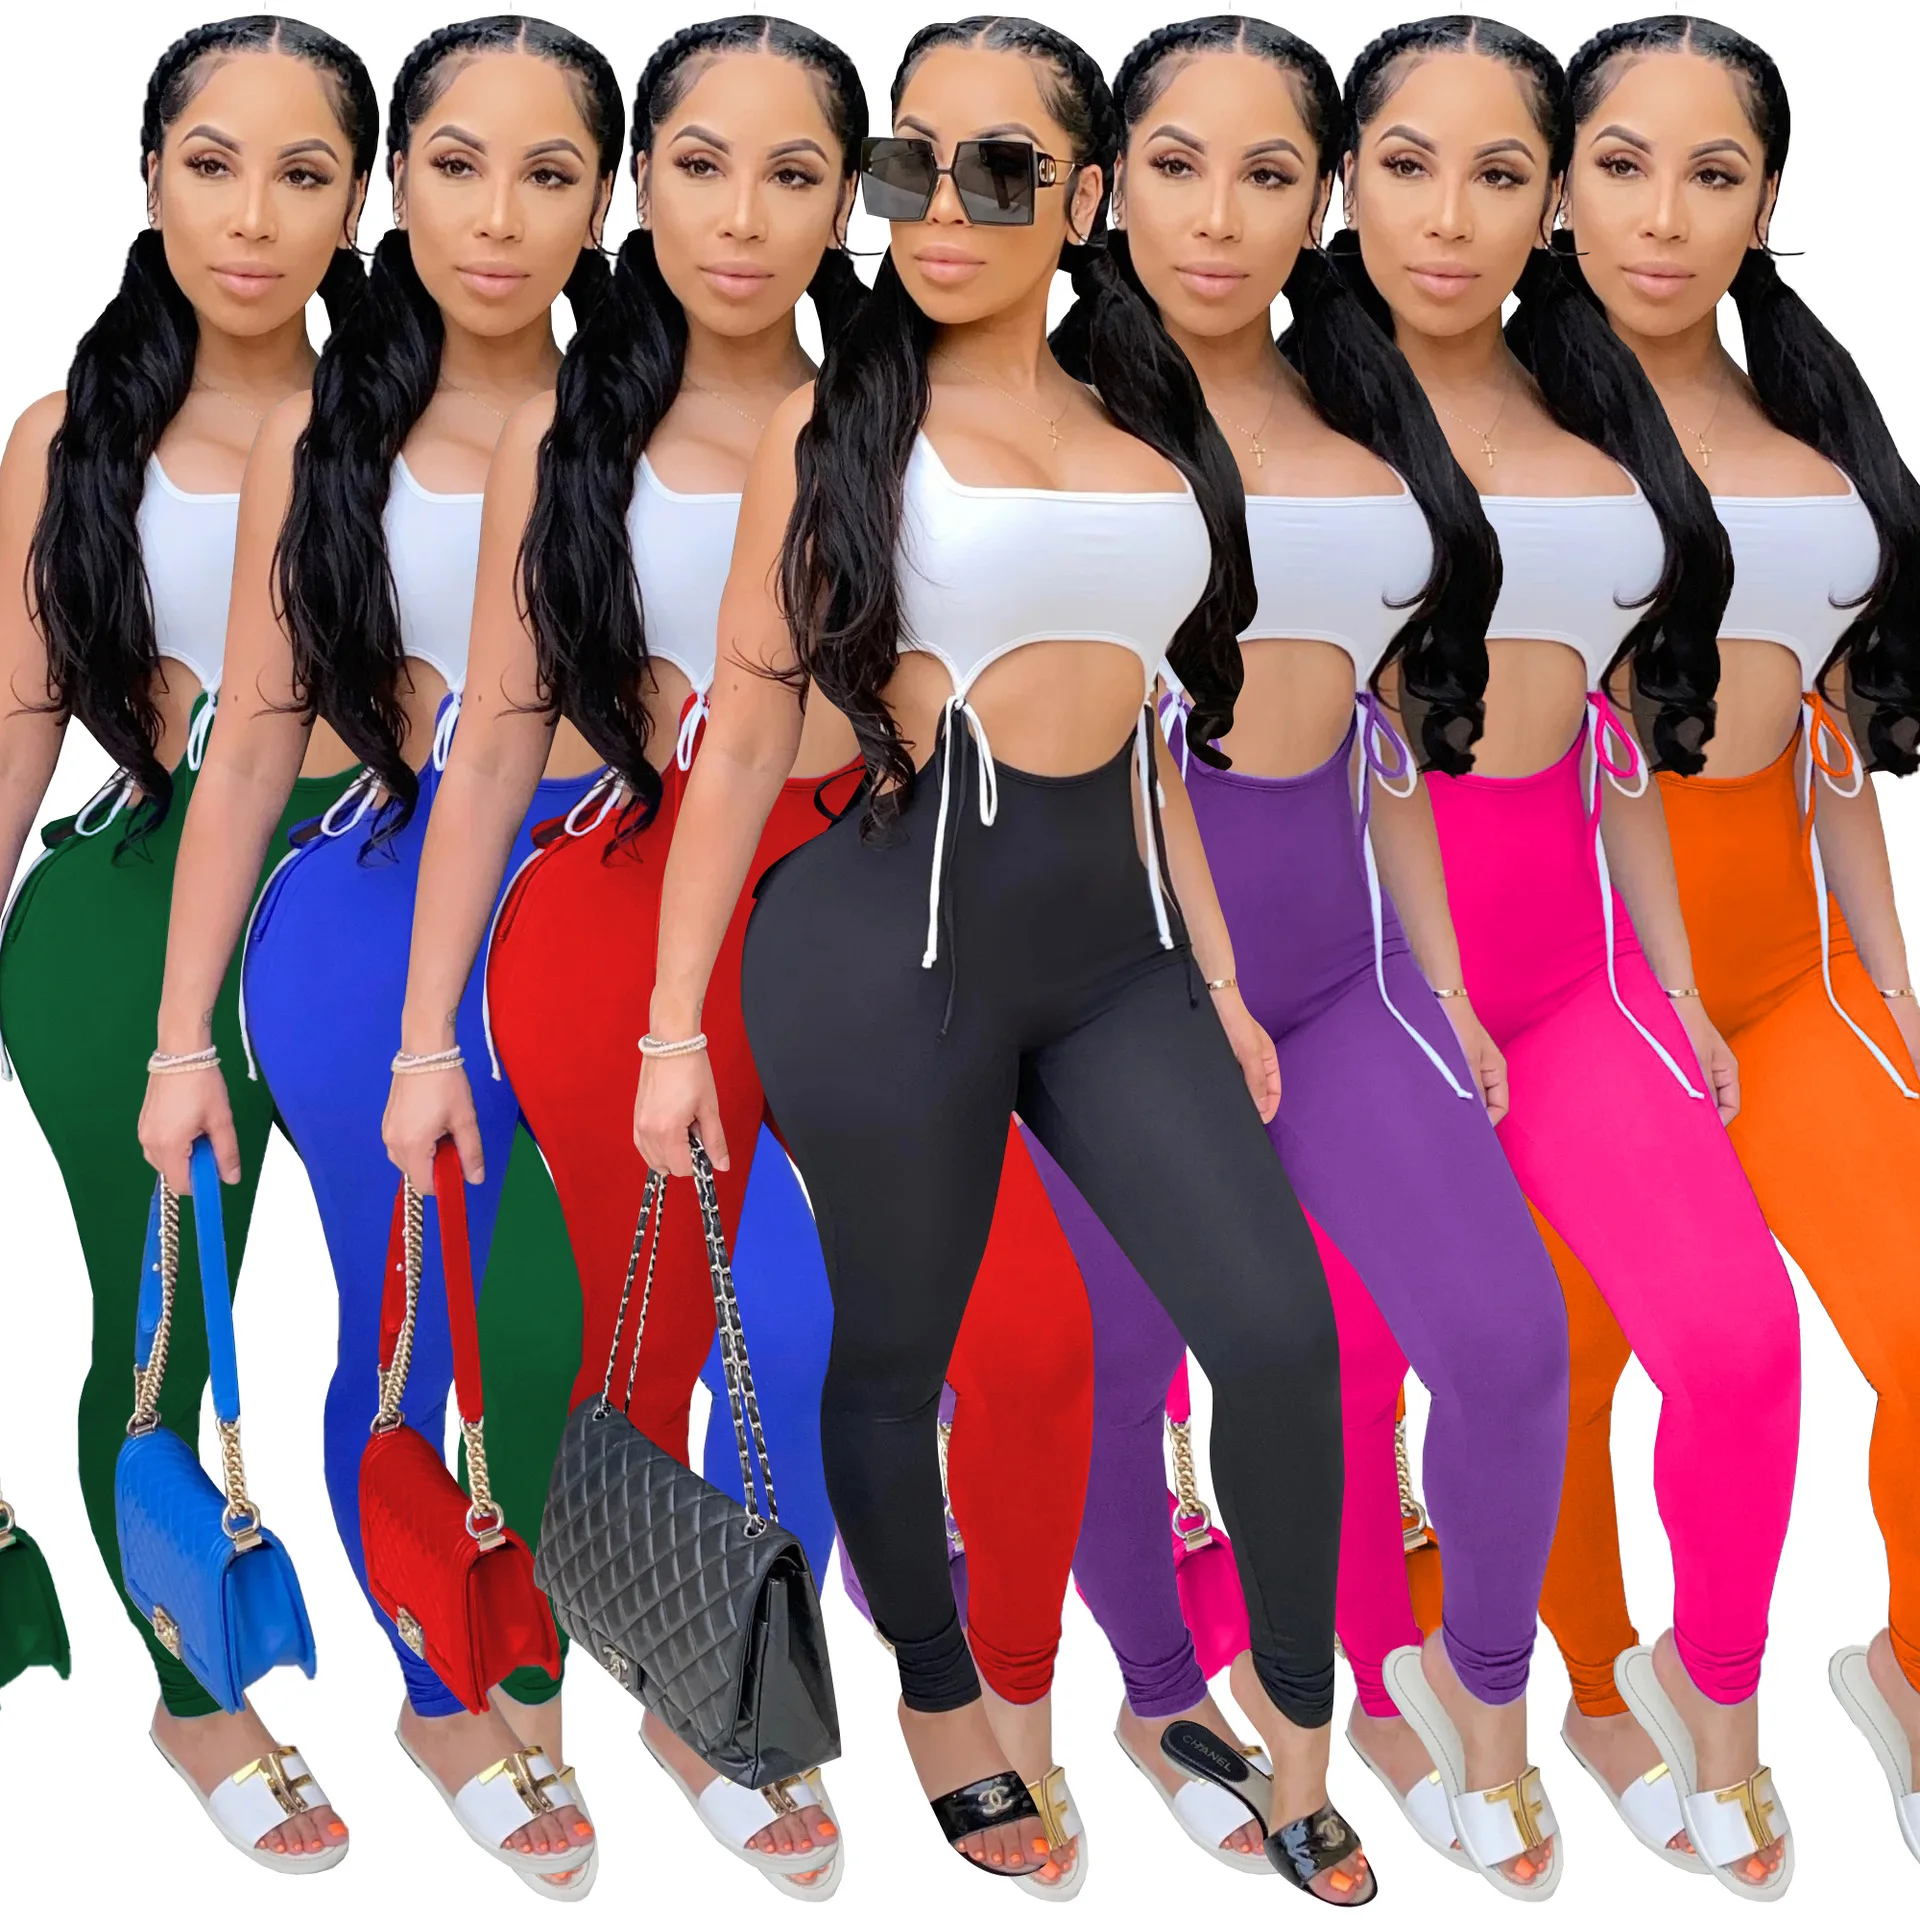 Hollow Out Patchwork Jumpsuit Rompers Trousers 2021 New Sexy Women Sleeveless Bodycon Jumpsuit Summer Sports Long Pants Jumpsuit women s sexy backless hip lift yoga jumpsuit quick dried sports fitness pants new spicy girl autumn 2021 1 pc